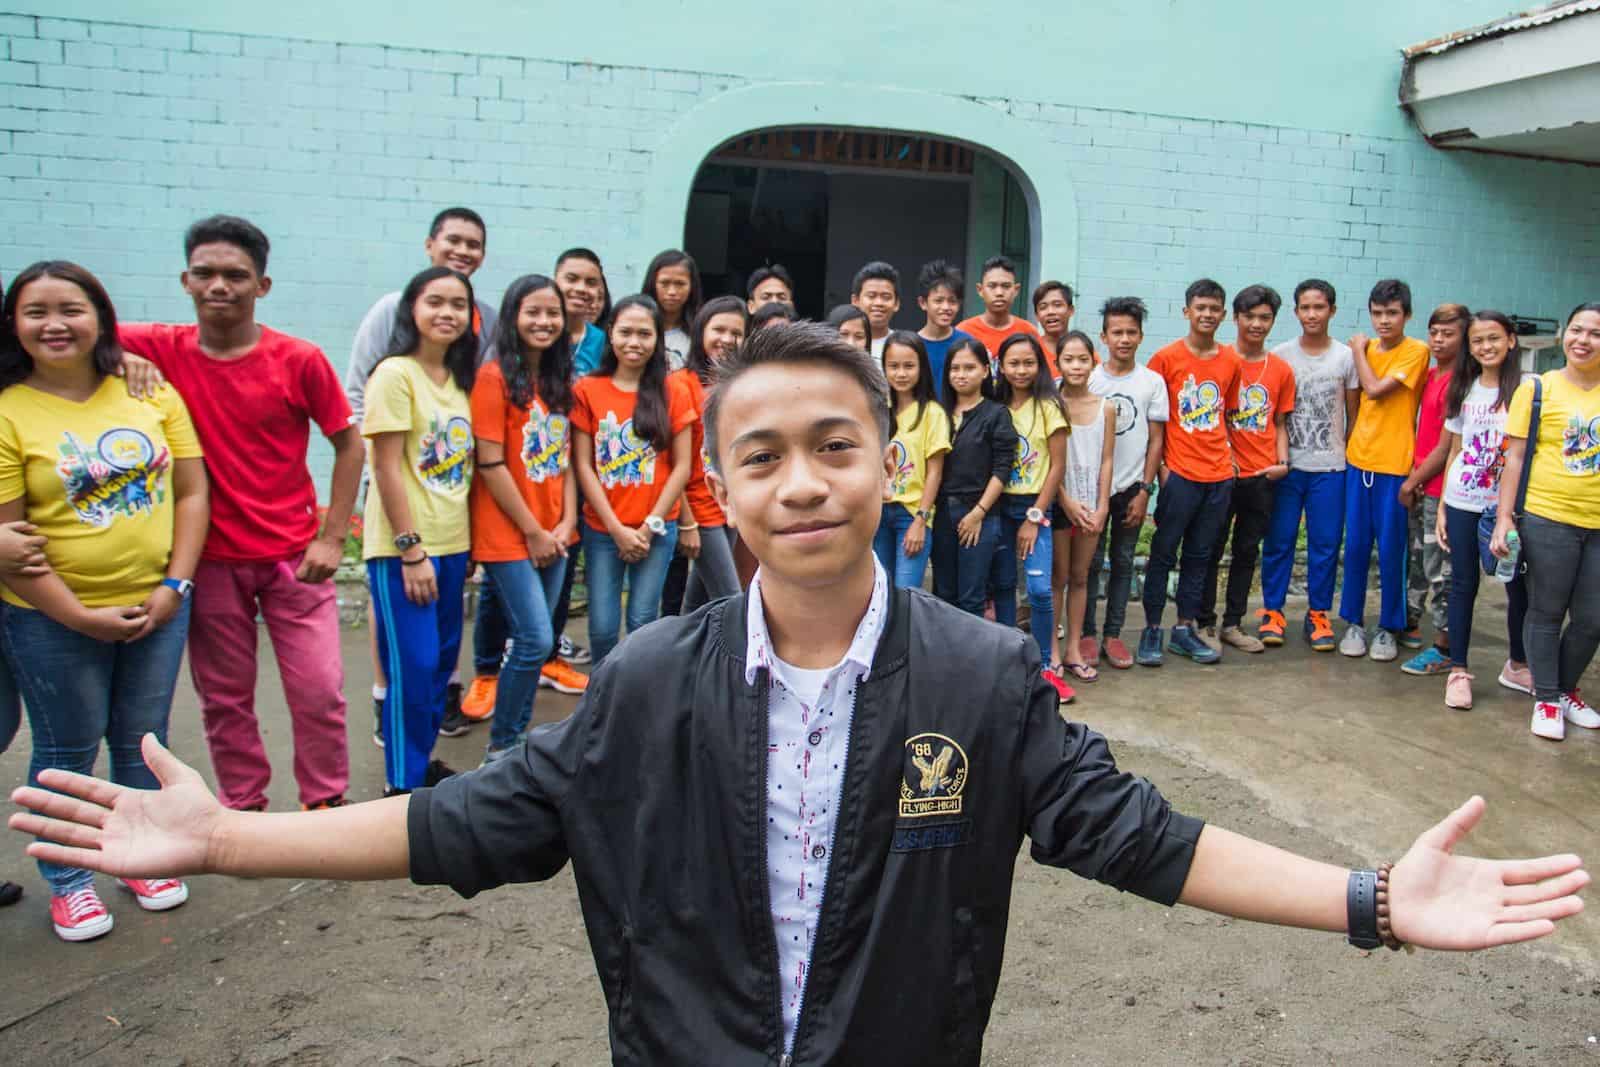 A teen boy, the "Most Excellent Child in the Philippines," wearing a black jacket and white shirt holds his arms out to the side, smiling, standing in front of a large group of children in front of a church.